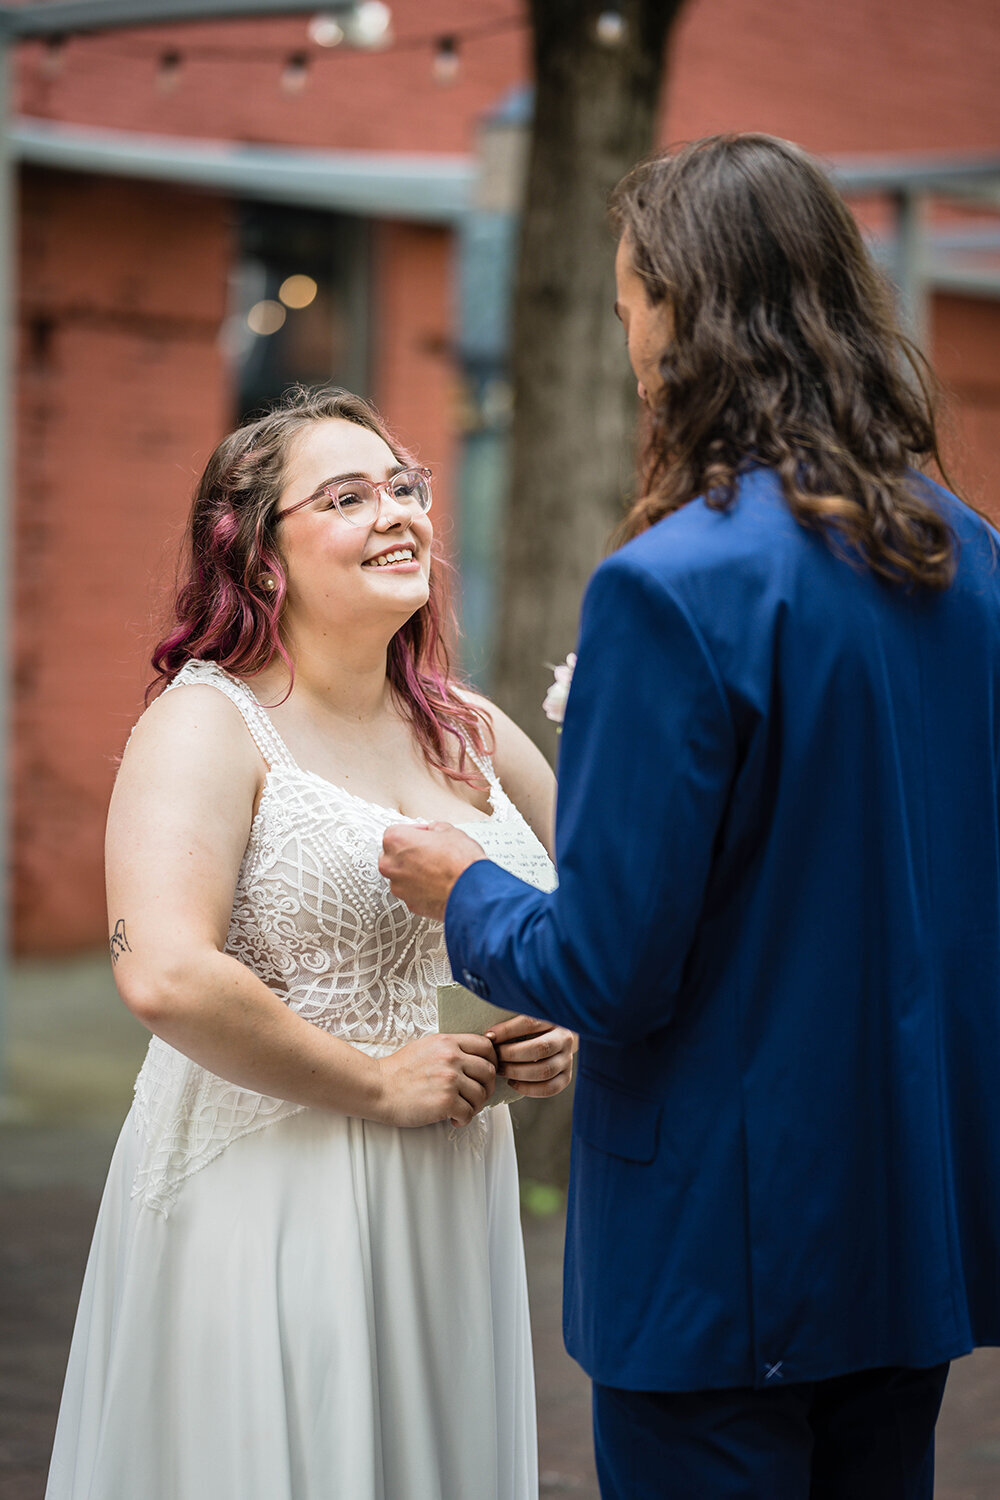 A bride smiles widely at the groom as he reads his vows to her during the ceremony on their elopement day in a tea-light lit alleyway in Downtown Roanoke.